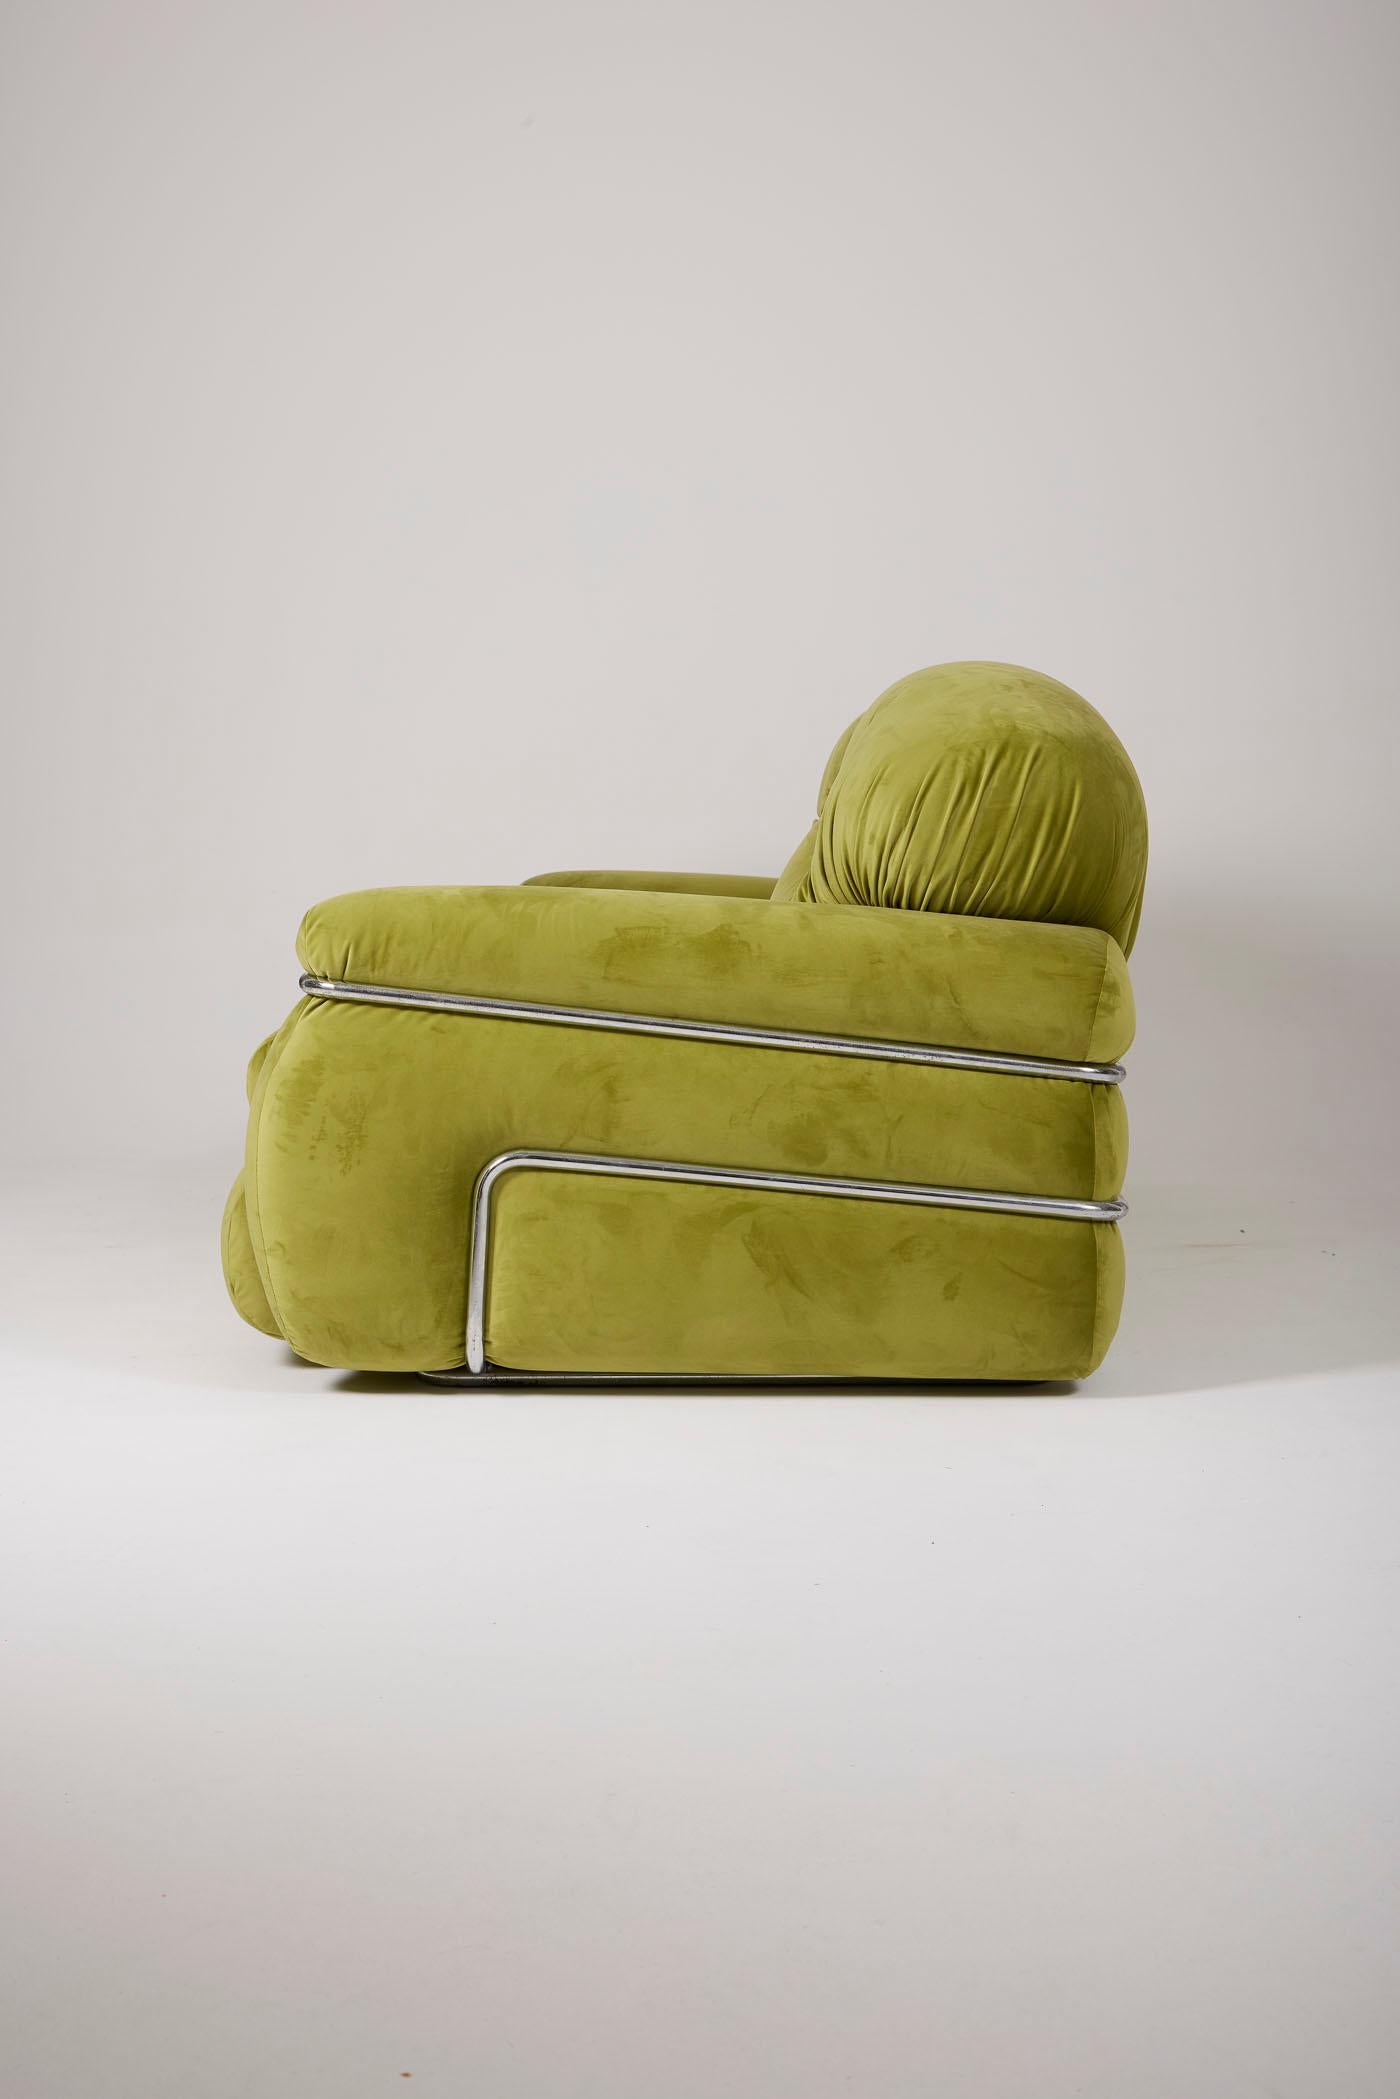 Italian 3-seater sofa in apple green velvet with a metal frame in the spirit of designer Giuseppe Munari, from the 1970s. Perfect condition.
DV363